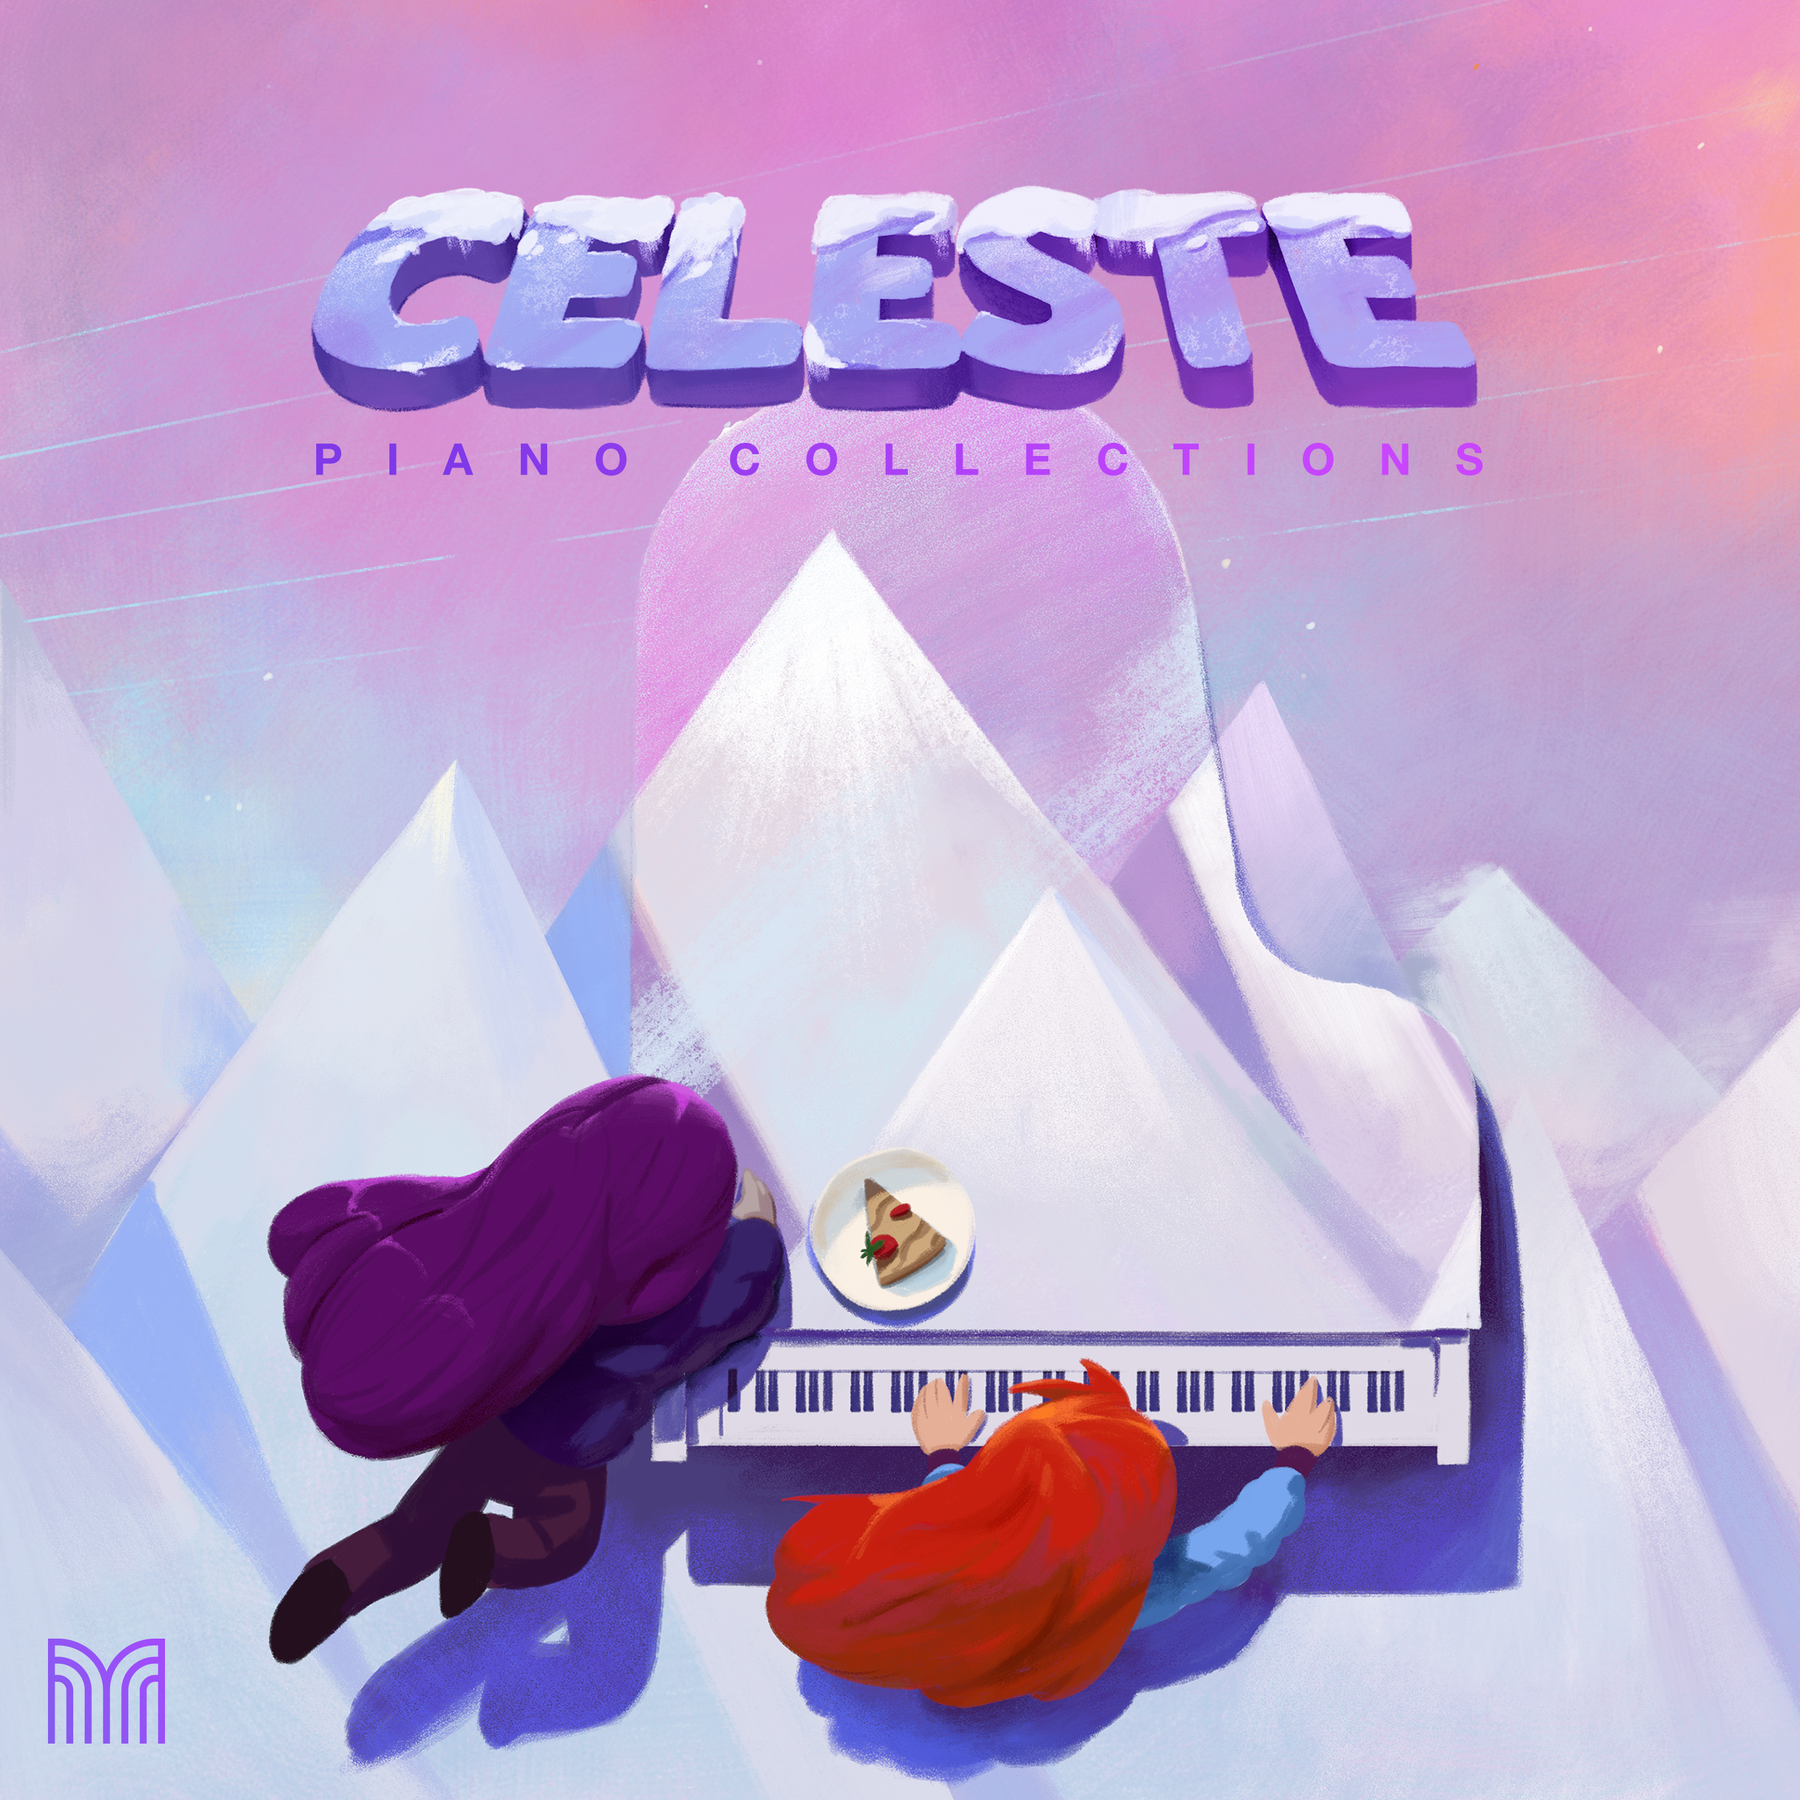 Celeste : Piano Collections